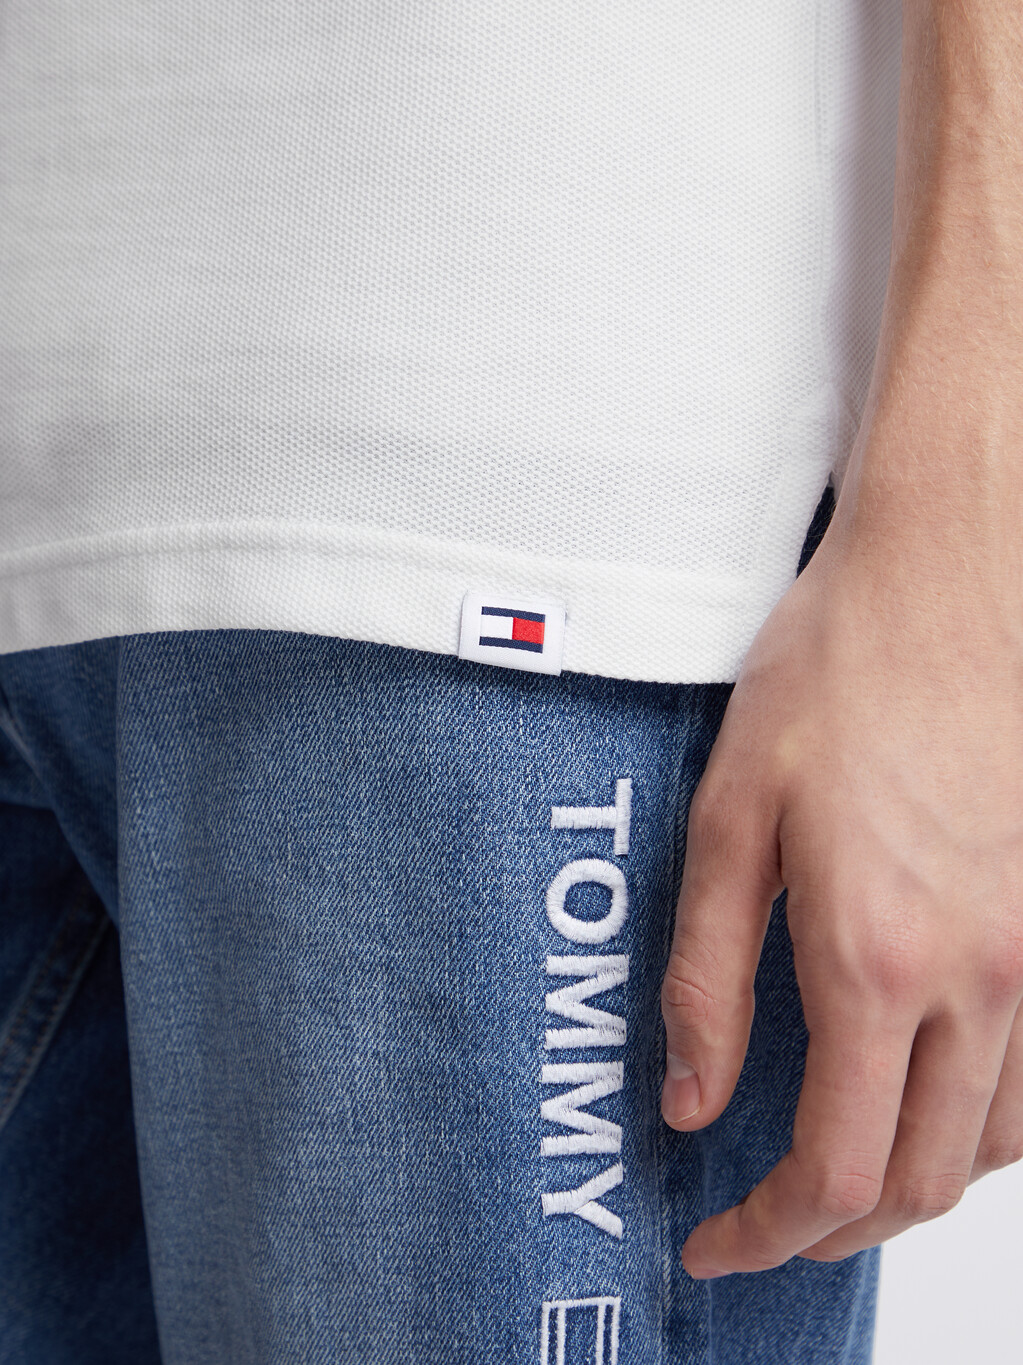 Tommy Jeans NYC Polo, White, hi-res